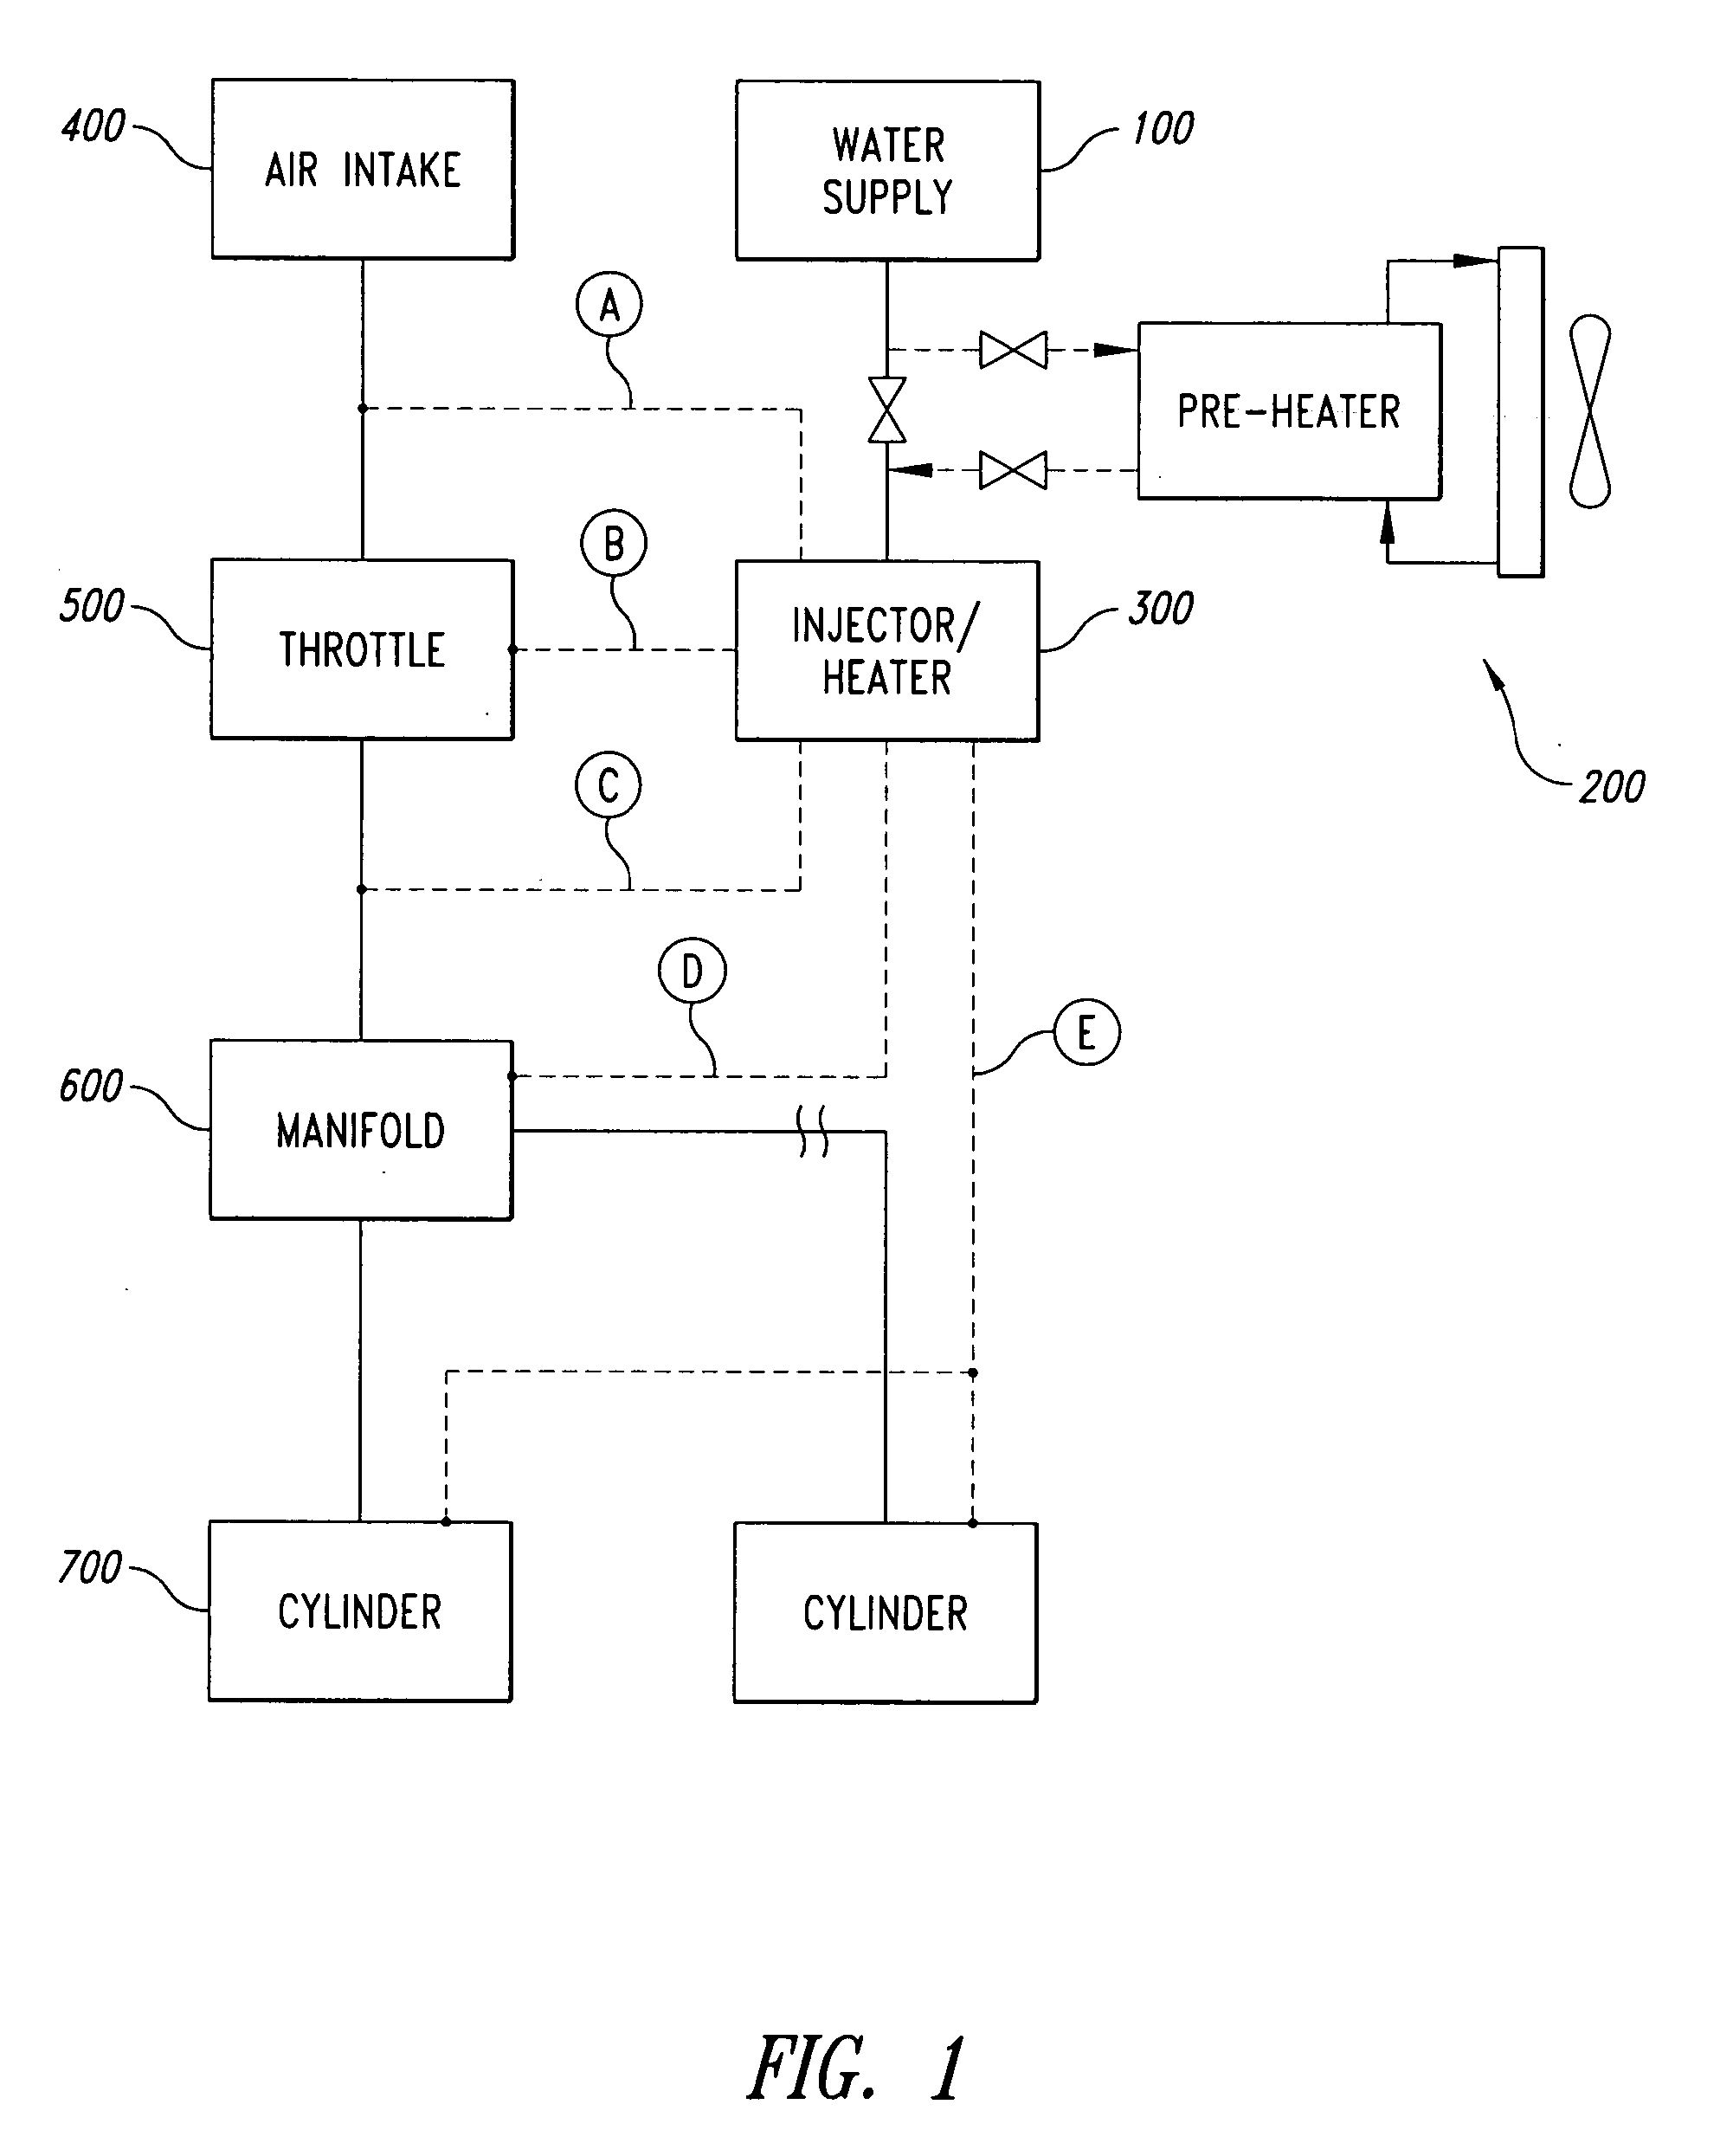 Devices, systems and methods for controlling introduction of additives into an internal combustion engine